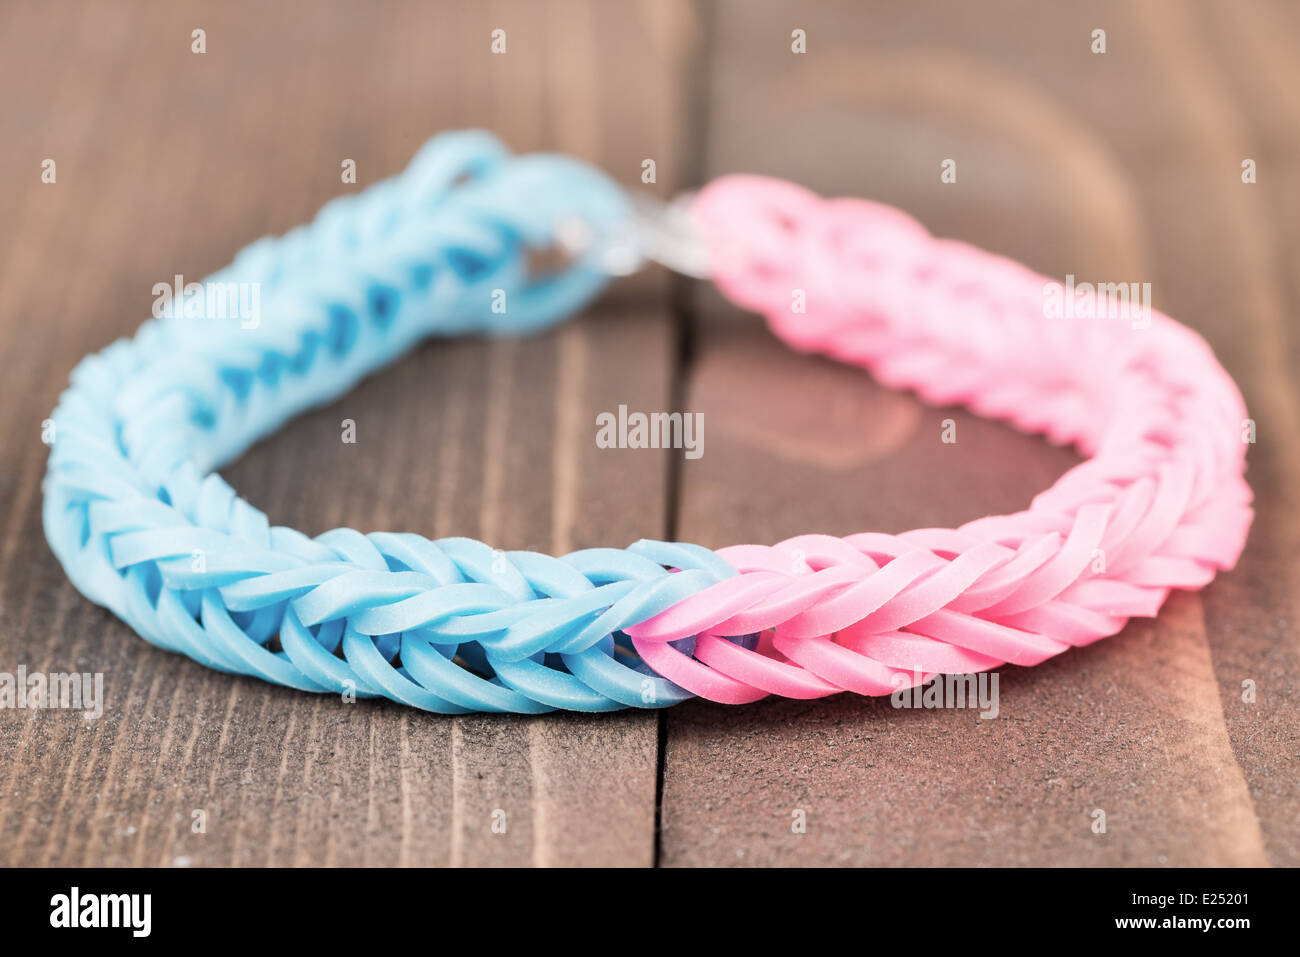 Two color rubber bracelet over a wooden background Stock Photo